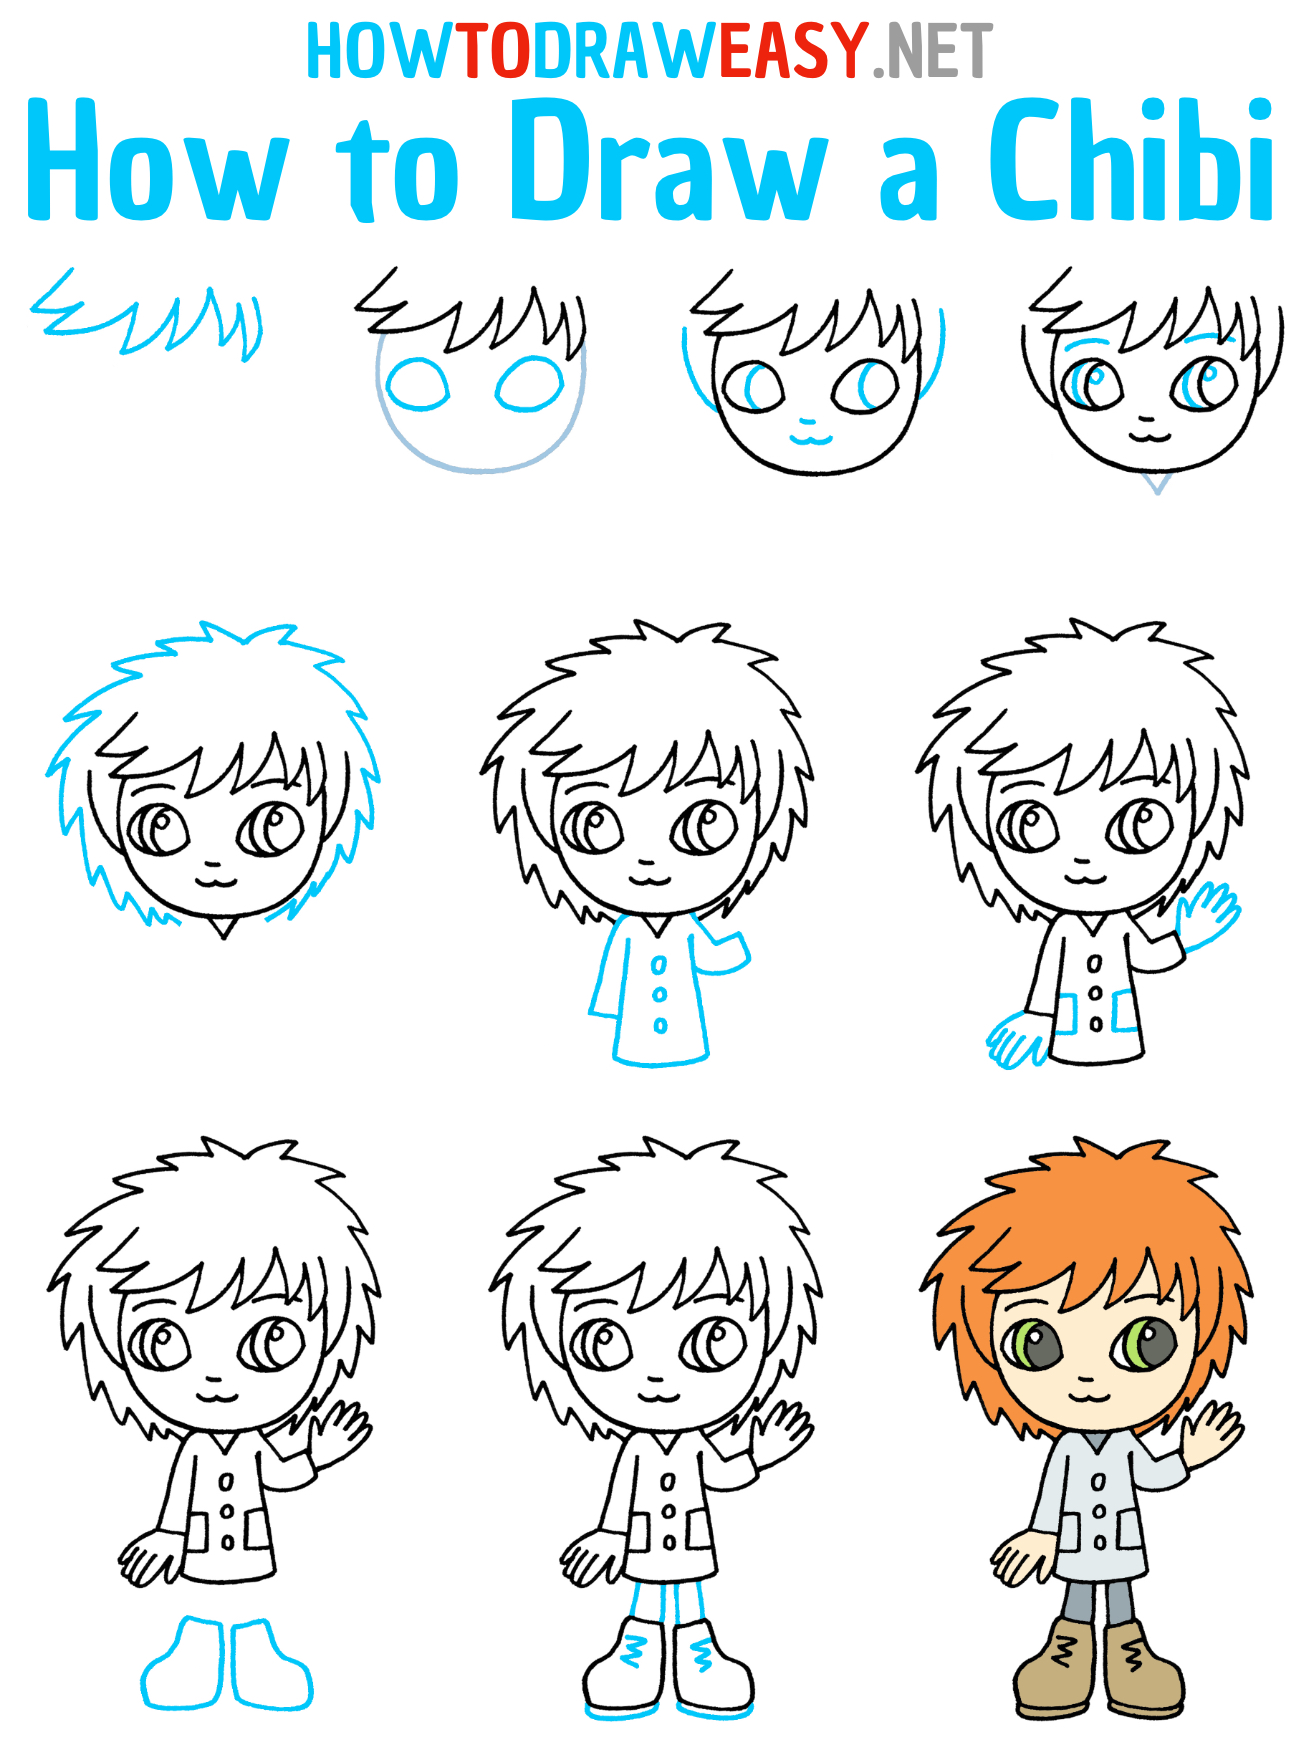 How to Draw a Chibi Person Step by Step